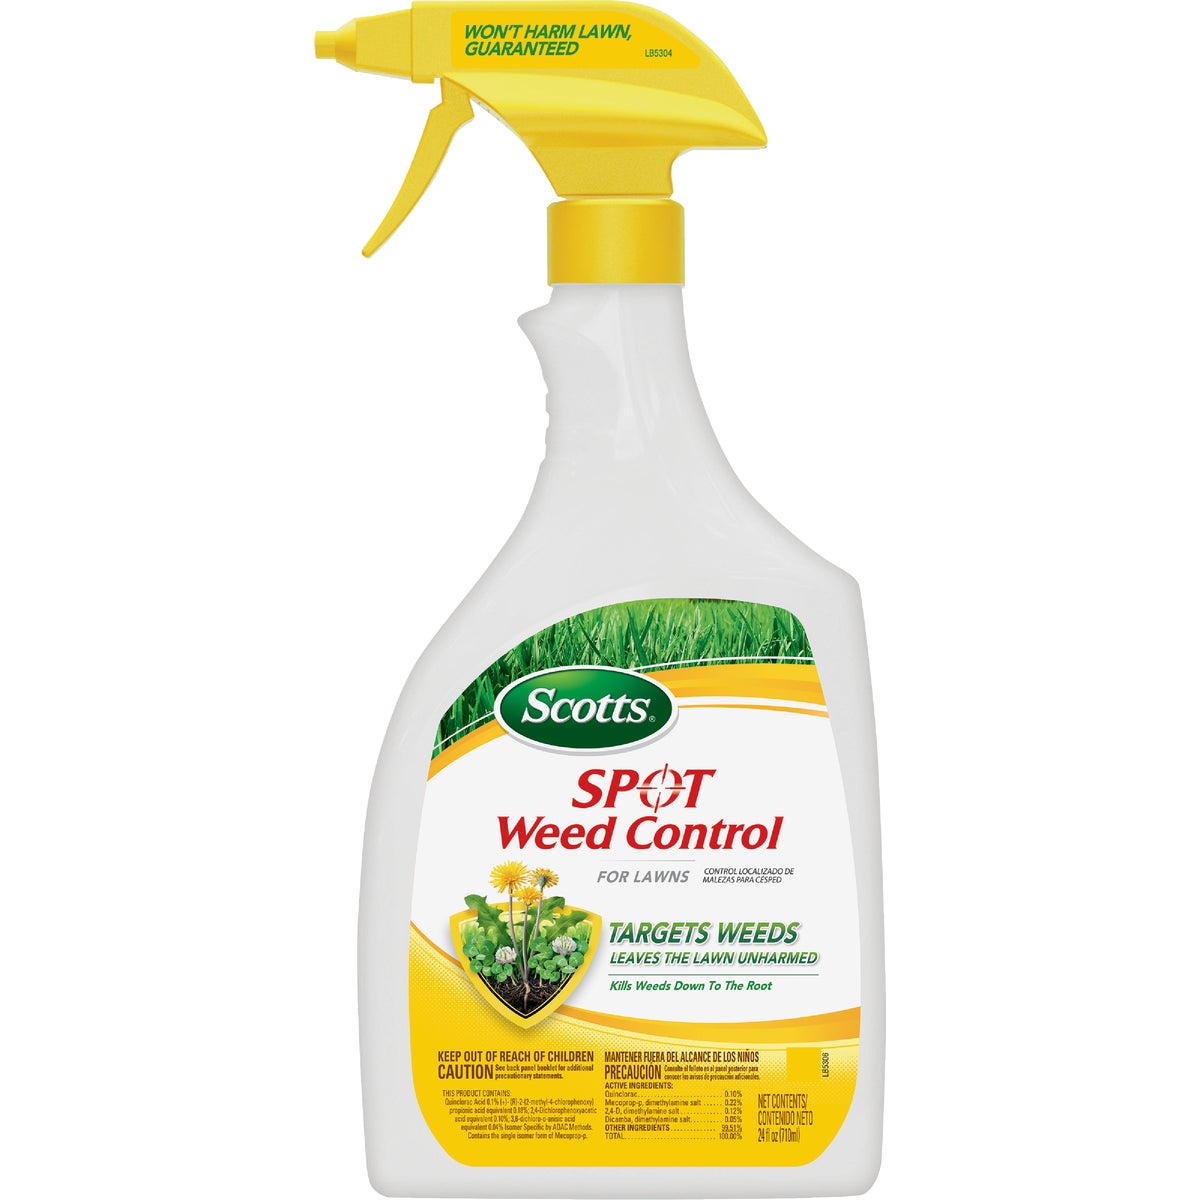 Scotts 24 Oz. Ready To Use Trigger Spray Spot Weed Killer for Lawns